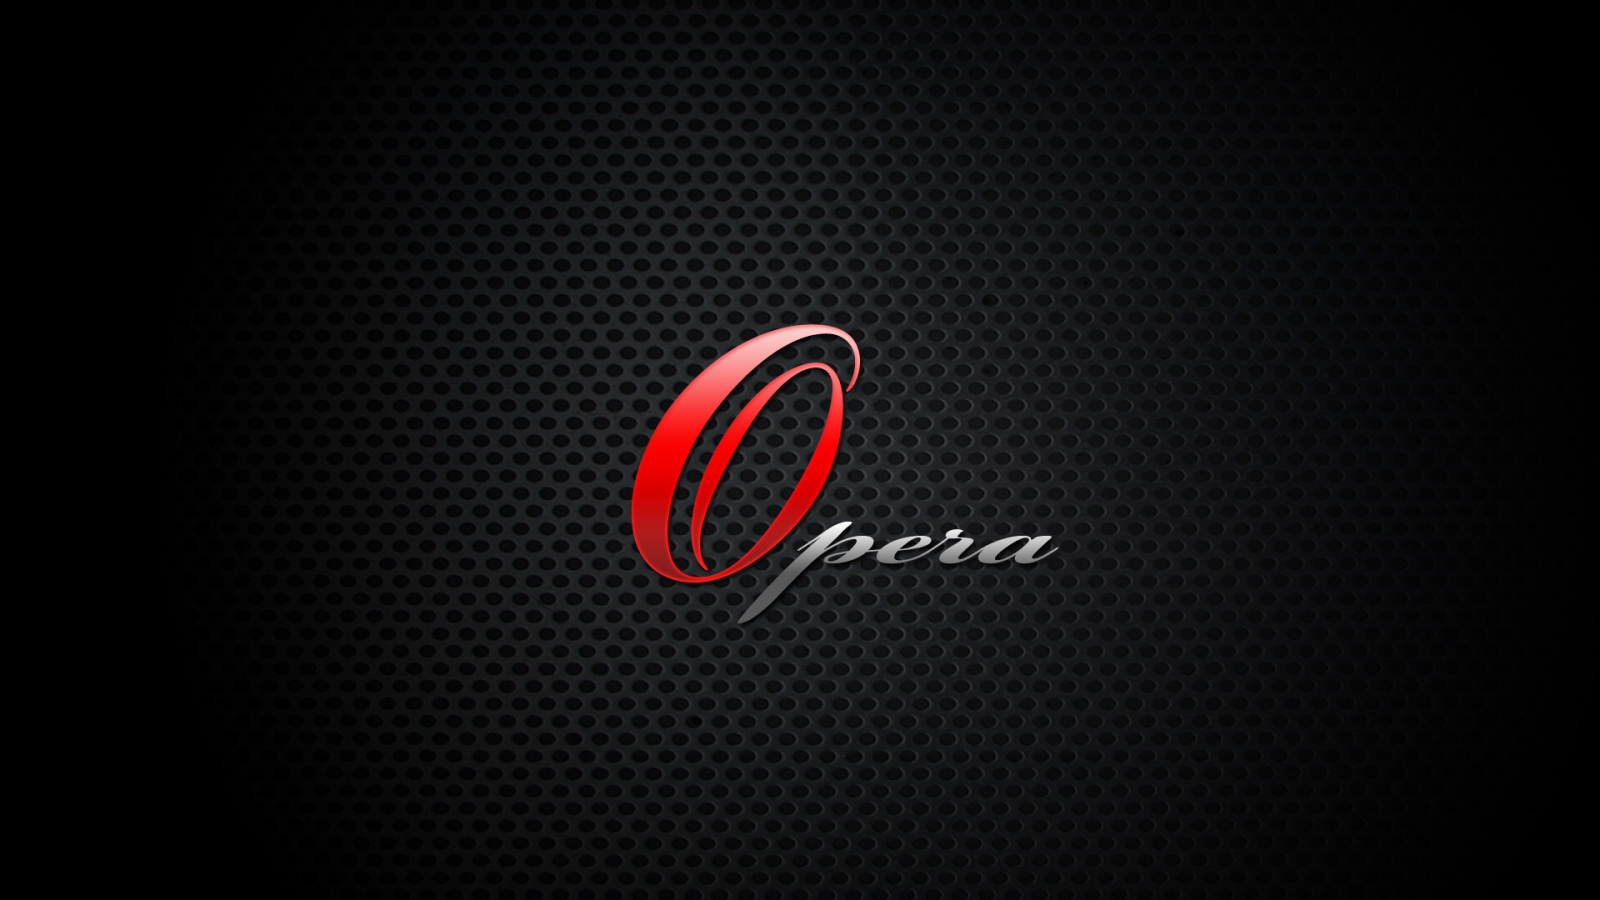 Opera Browser Tech for 1600 x 900 HDTV resolution